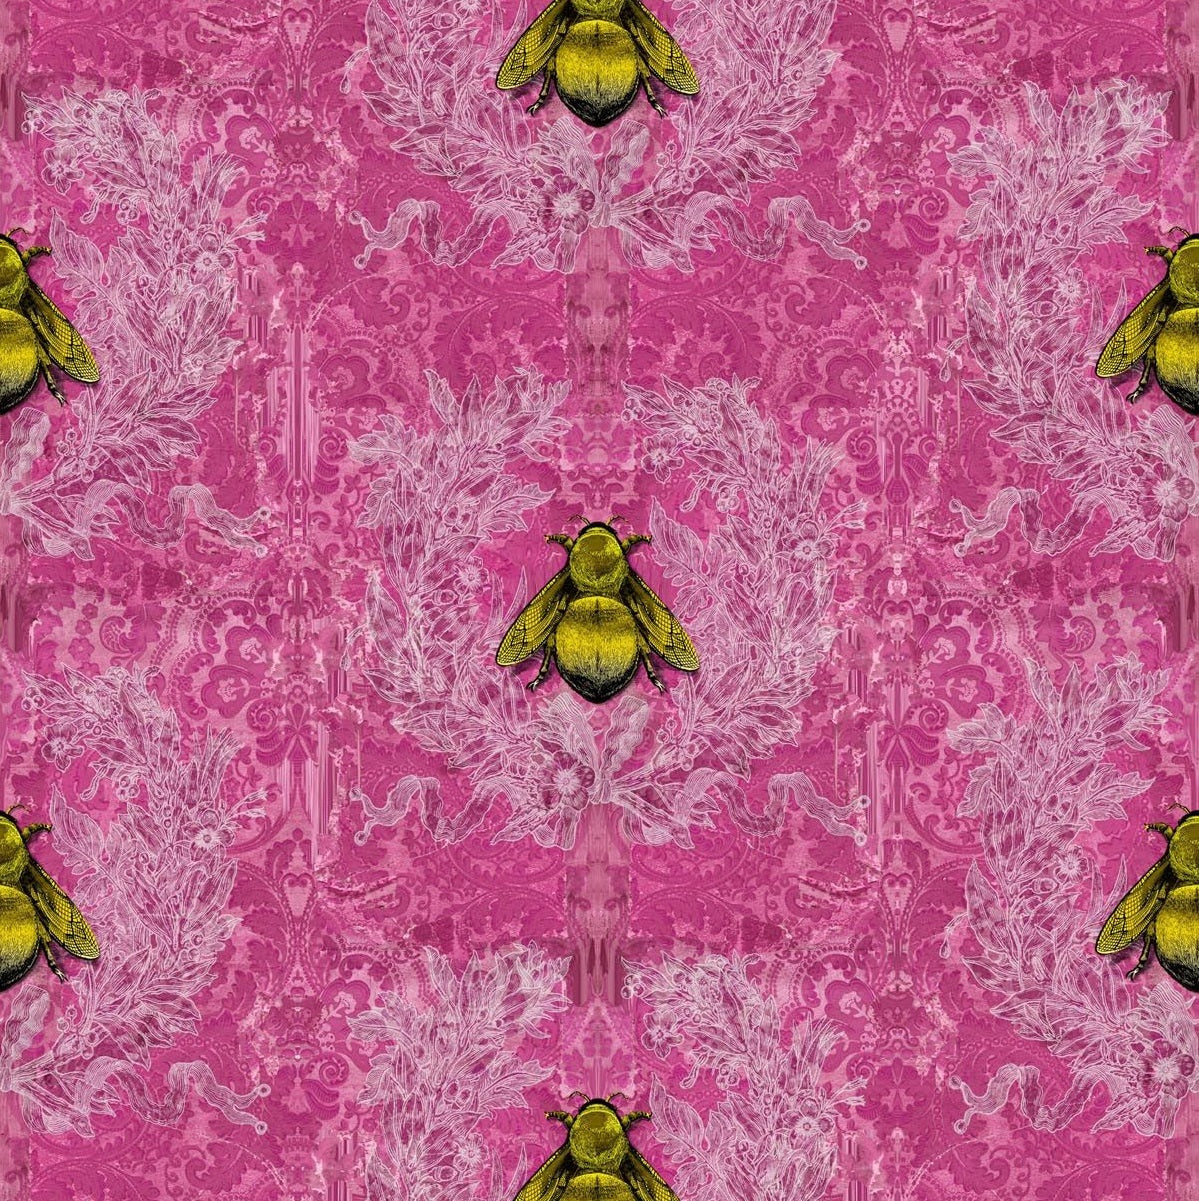 Gold Bees on Pink